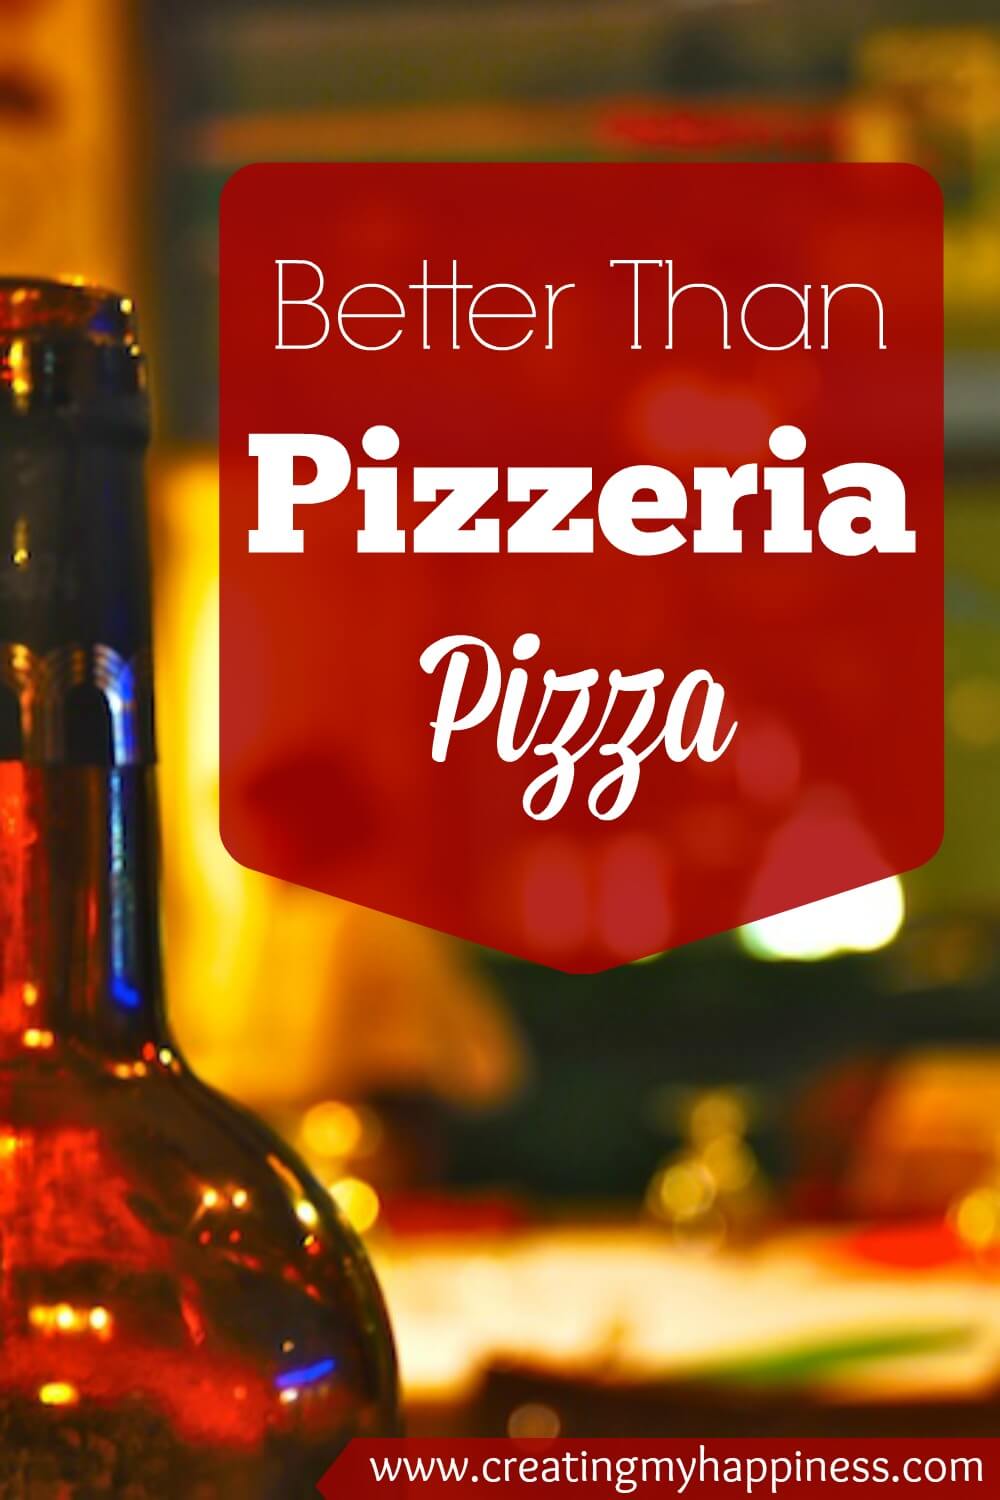 I never knew making pizza from scratch could be so easy! No need for takeout with this simple, delicious pizza recipe.